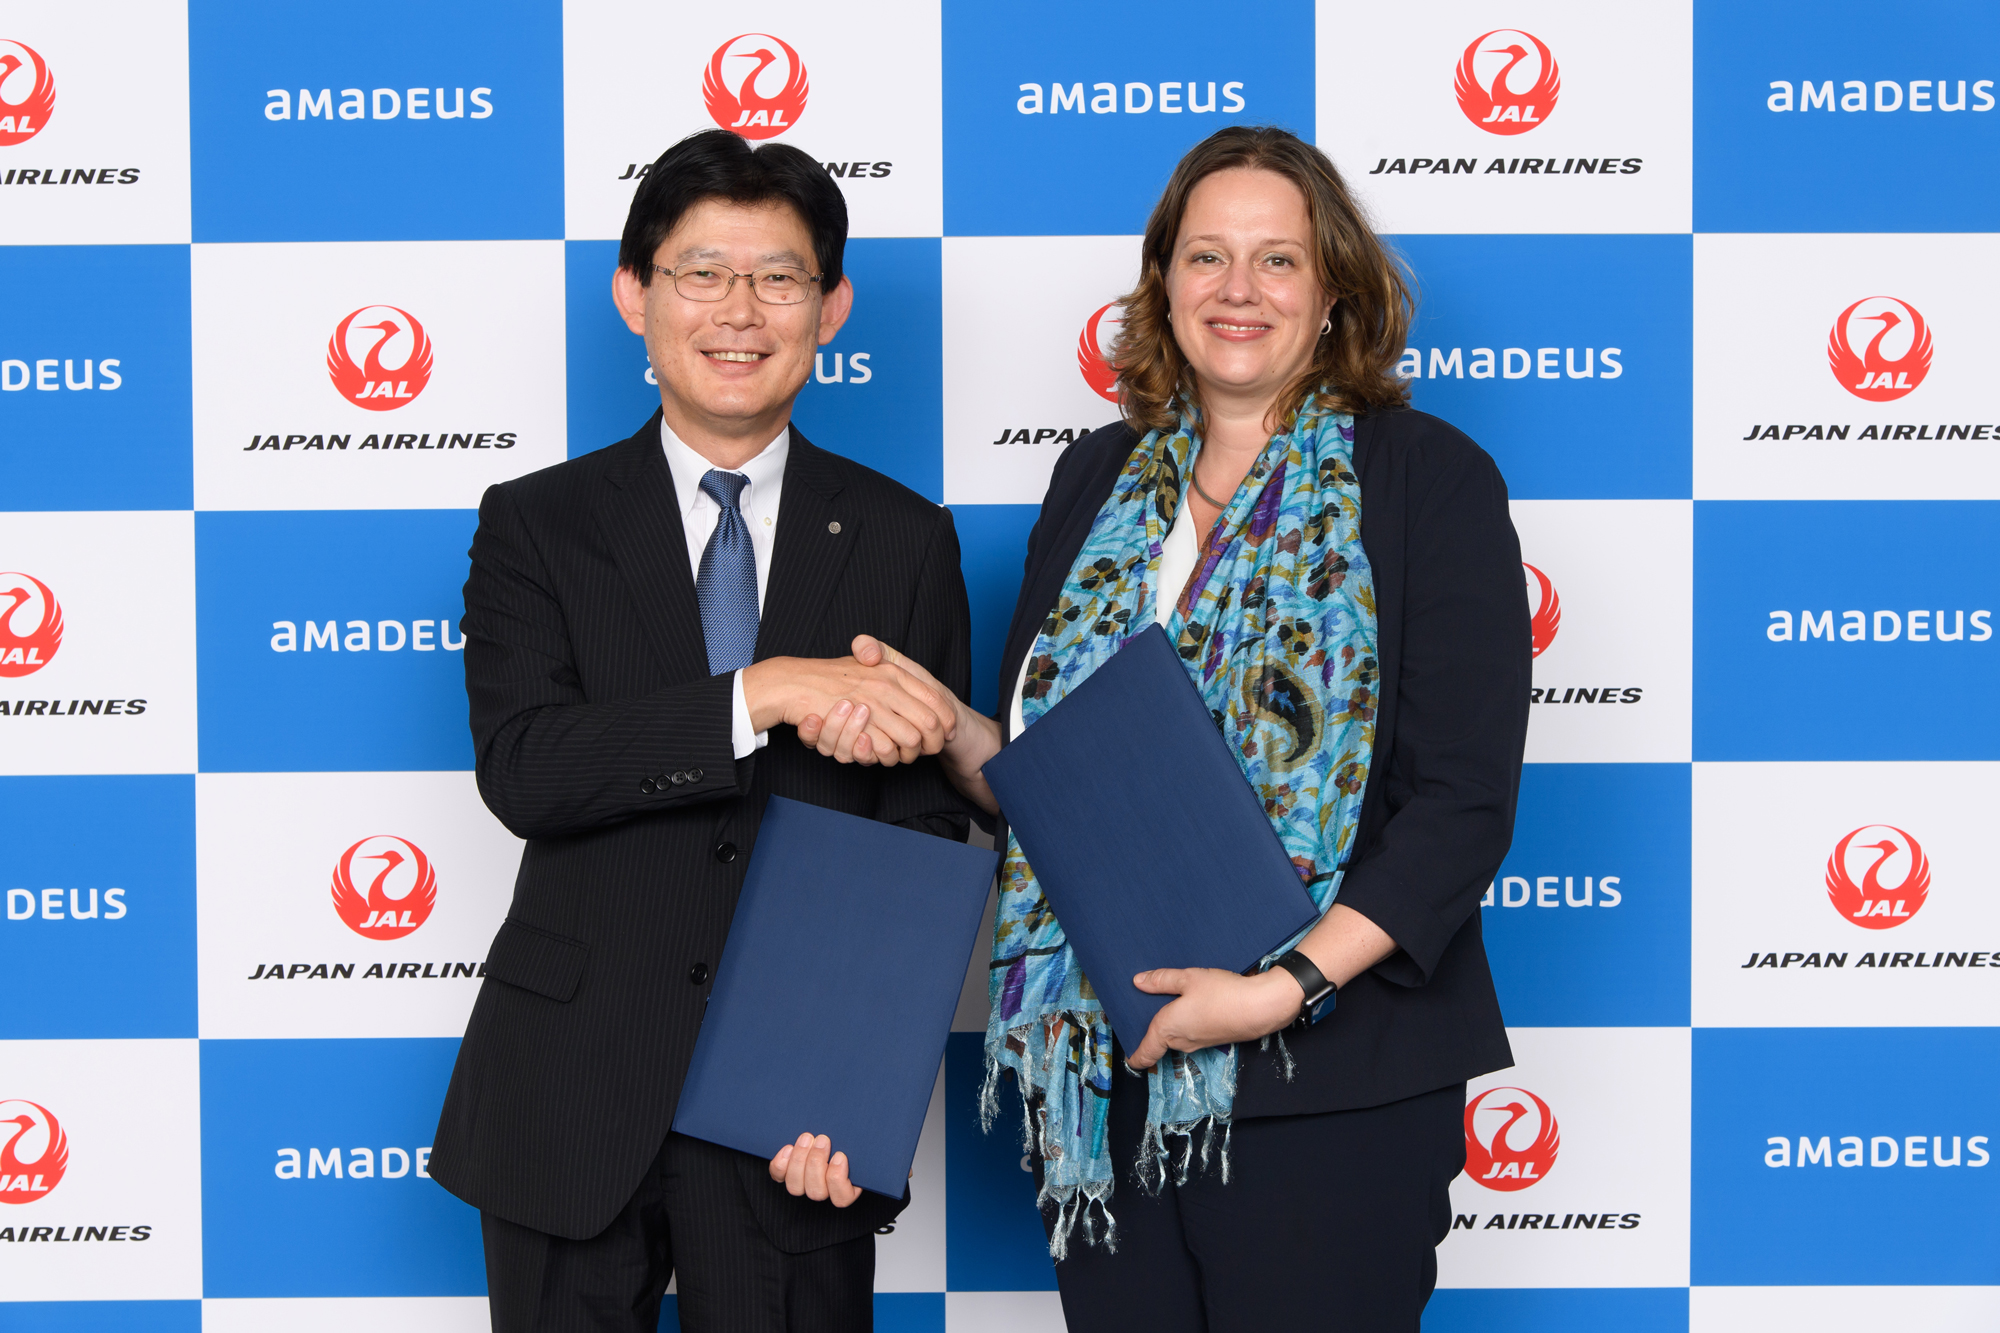 Japan Airlines And Amadeus Expand Partnership To Deliver New